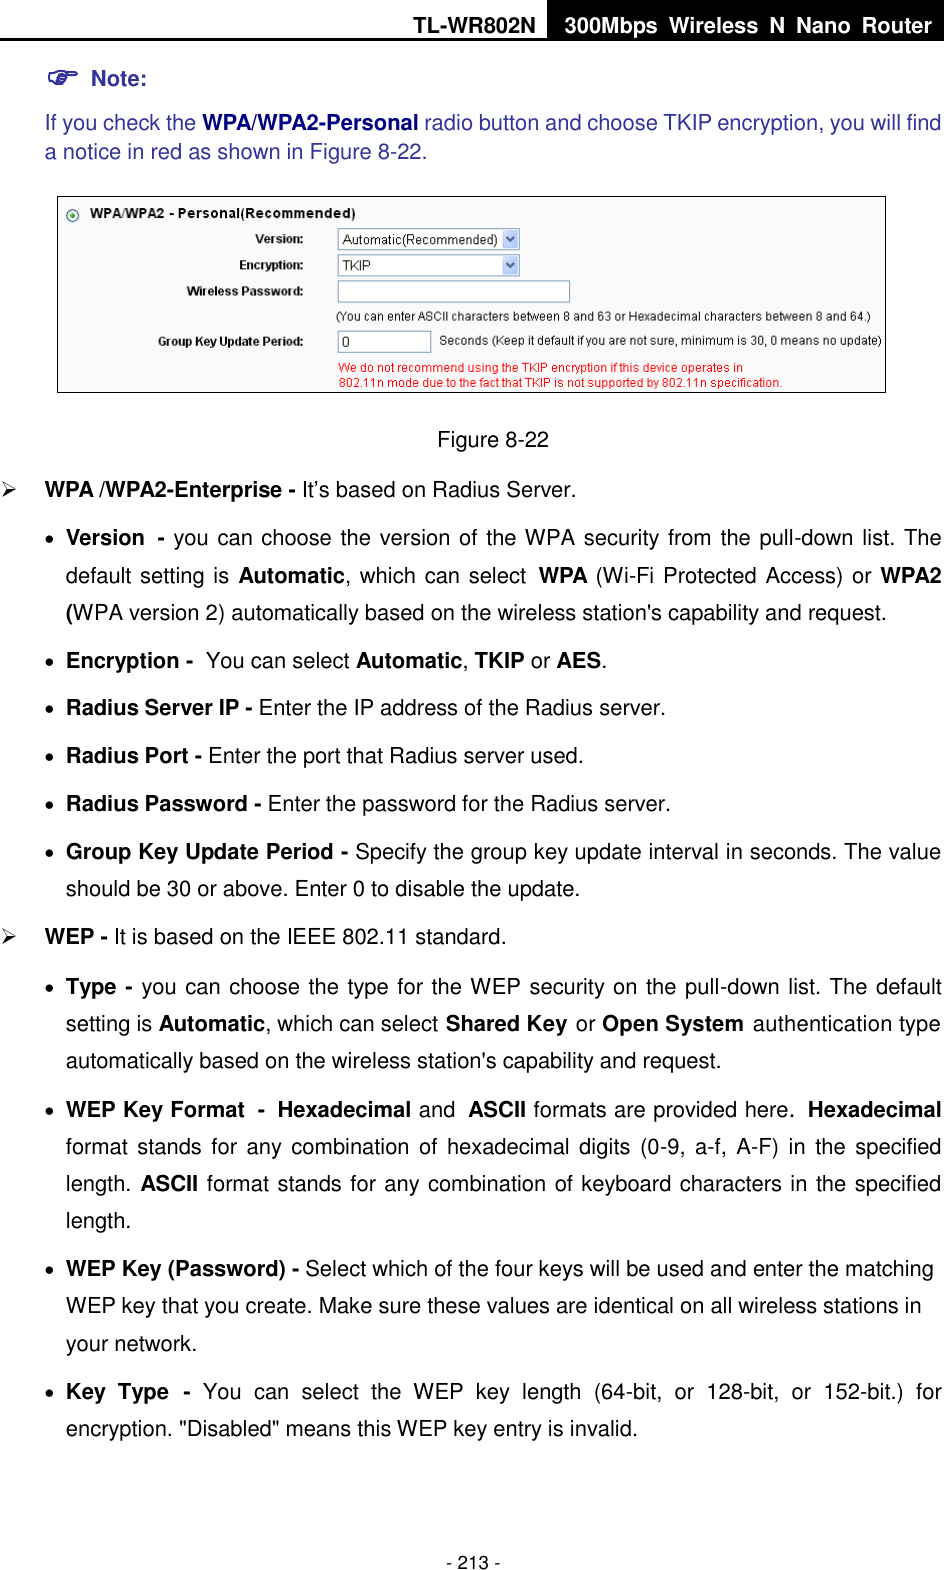 TL-WR802N 300Mbps  Wireless  N  Nano  Router  - 213 -  Note:   If you check the WPA/WPA2-Personal radio button and choose TKIP encryption, you will find a notice in red as shown in Figure 8-22.  Figure 8-22  WPA /WPA2-Enterprise - It’s based on Radius Server.  Version - you can choose the version of the WPA security from the pull-down list. The default setting is Automatic, which can select WPA (Wi-Fi Protected Access) or WPA2 (WPA version 2) automatically based on the wireless station&apos;s capability and request.  Encryption - You can select Automatic, TKIP or AES.  Radius Server IP - Enter the IP address of the Radius server.  Radius Port - Enter the port that Radius server used.  Radius Password - Enter the password for the Radius server.  Group Key Update Period - Specify the group key update interval in seconds. The value should be 30 or above. Enter 0 to disable the update.  WEP - It is based on the IEEE 802.11 standard.    Type - you can choose the type for the WEP security on the pull-down list. The default setting is Automatic, which can select Shared Key or Open System authentication type automatically based on the wireless station&apos;s capability and request.  WEP Key Format - Hexadecimal and ASCII formats are provided here. Hexadecimal format stands  for any  combination of  hexadecimal digits  (0-9, a-f,  A-F)  in  the specified length. ASCII format stands for any combination of keyboard characters in the specified length.    WEP Key (Password) - Select which of the four keys will be used and enter the matching WEP key that you create. Make sure these values are identical on all wireless stations in your network.    Key  Type -  You  can  select  the  WEP  key  length  (64-bit,  or  128-bit,  or  152-bit.)  for encryption. &quot;Disabled&quot; means this WEP key entry is invalid. 